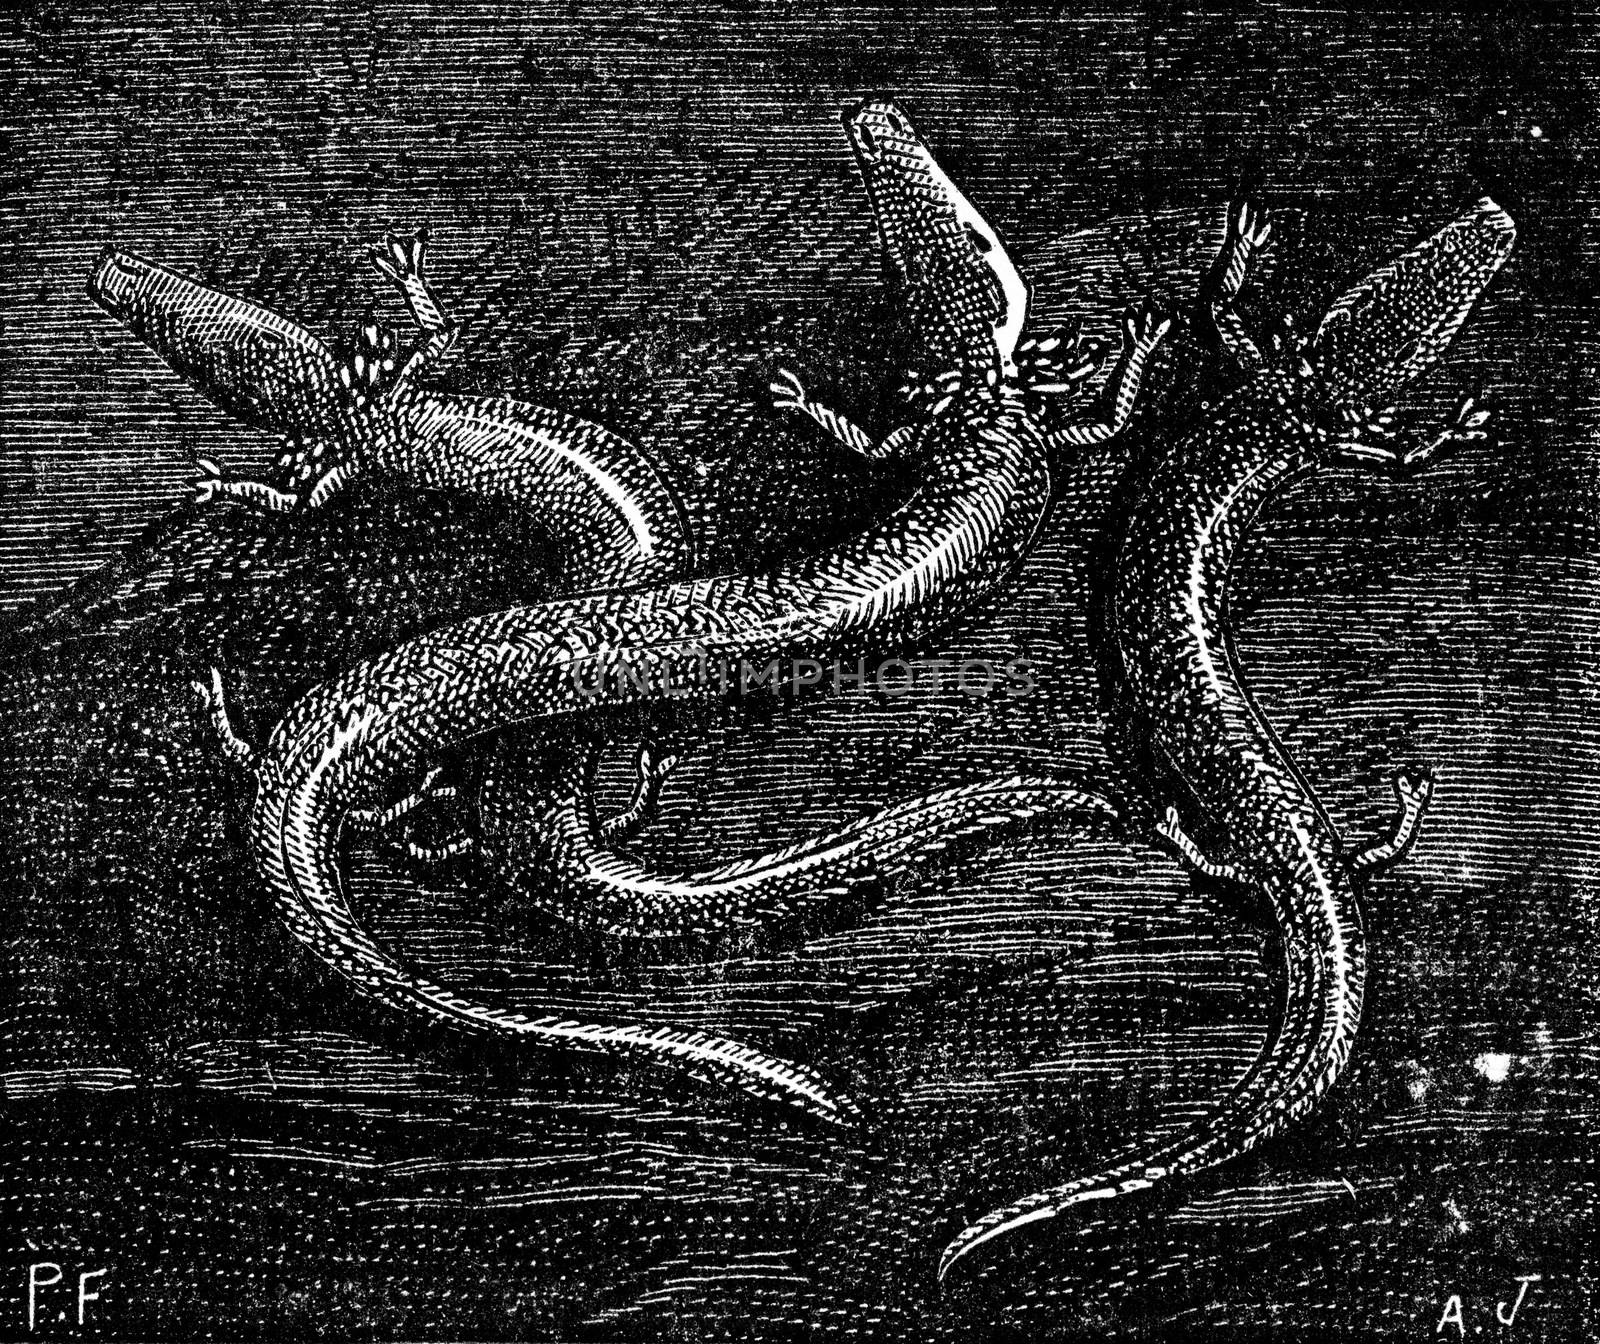 Example of processing the races and atrophy of organs, the blind-fish reptile caves of Carniola, vintage engraved illustration. Earth before man – 1886.
